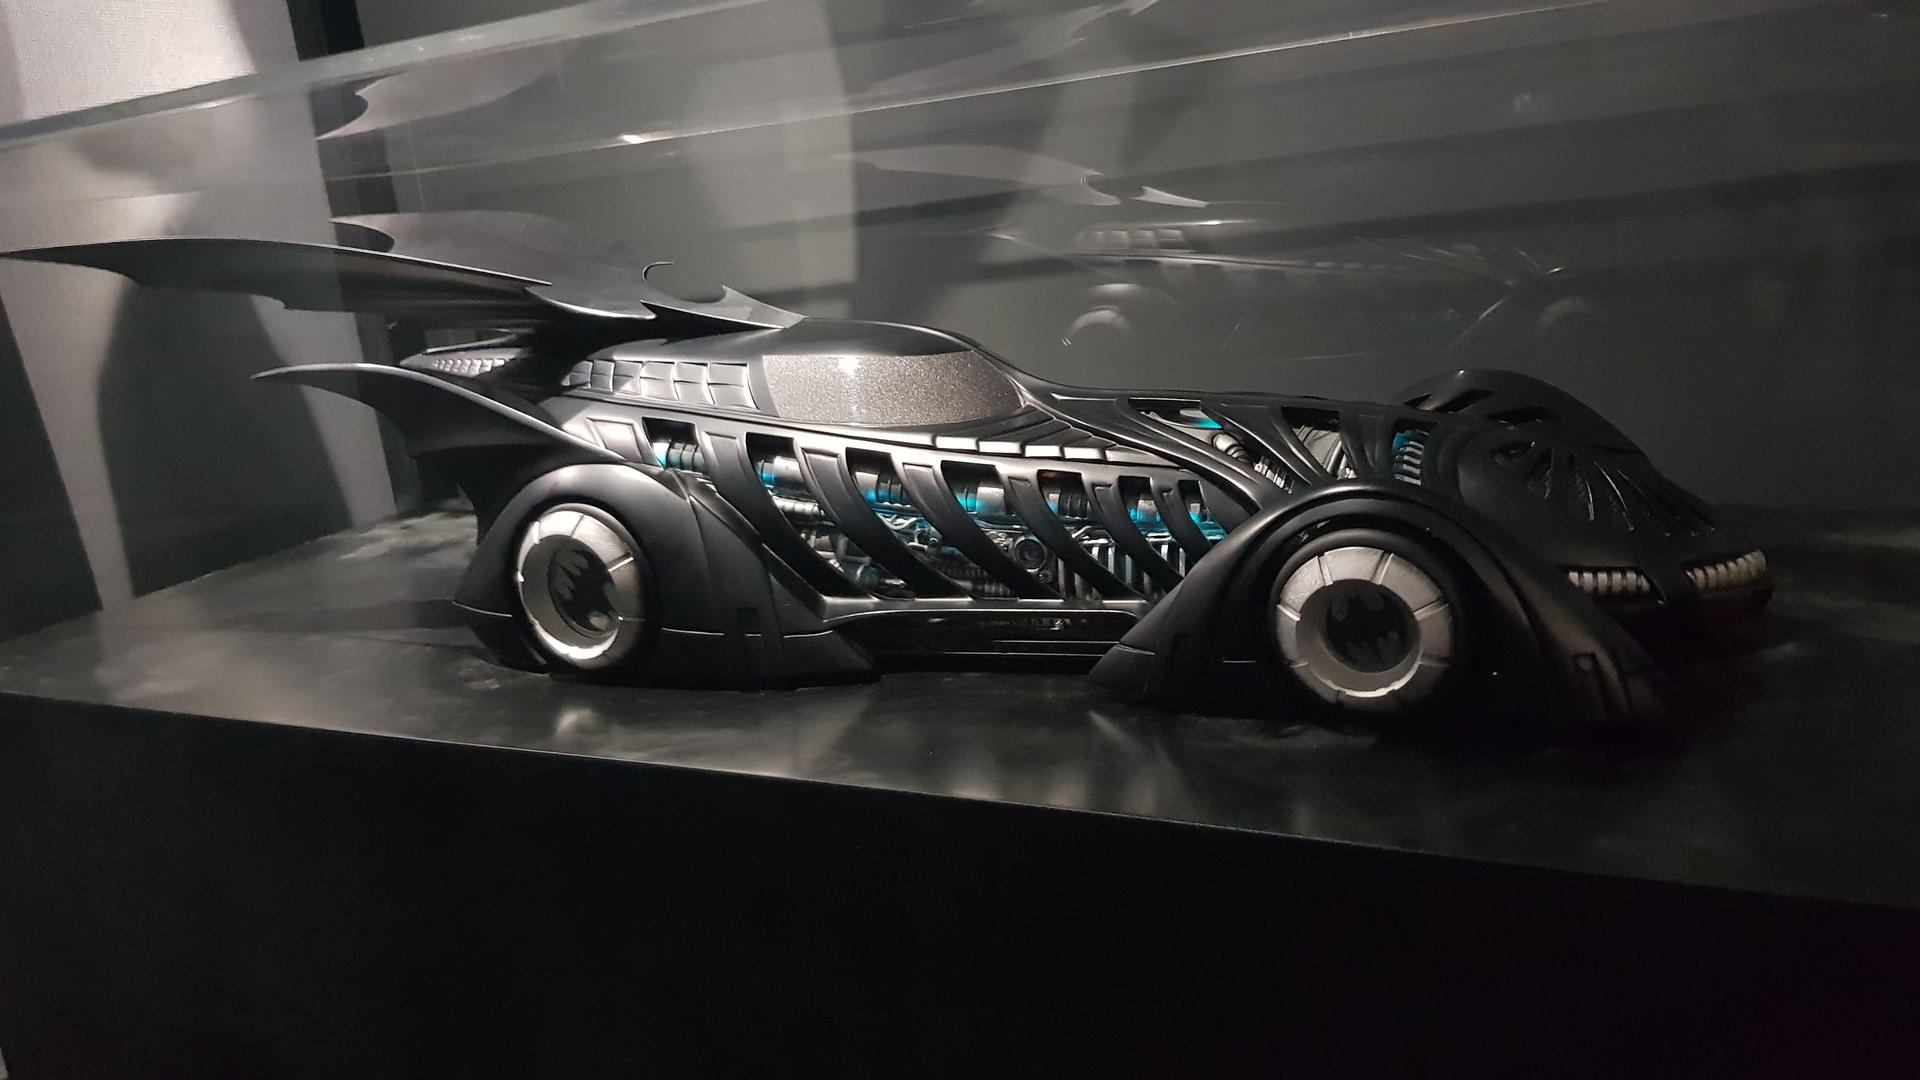 actual Batmobile model from Batman Forever by haseeb312 on DeviantArt